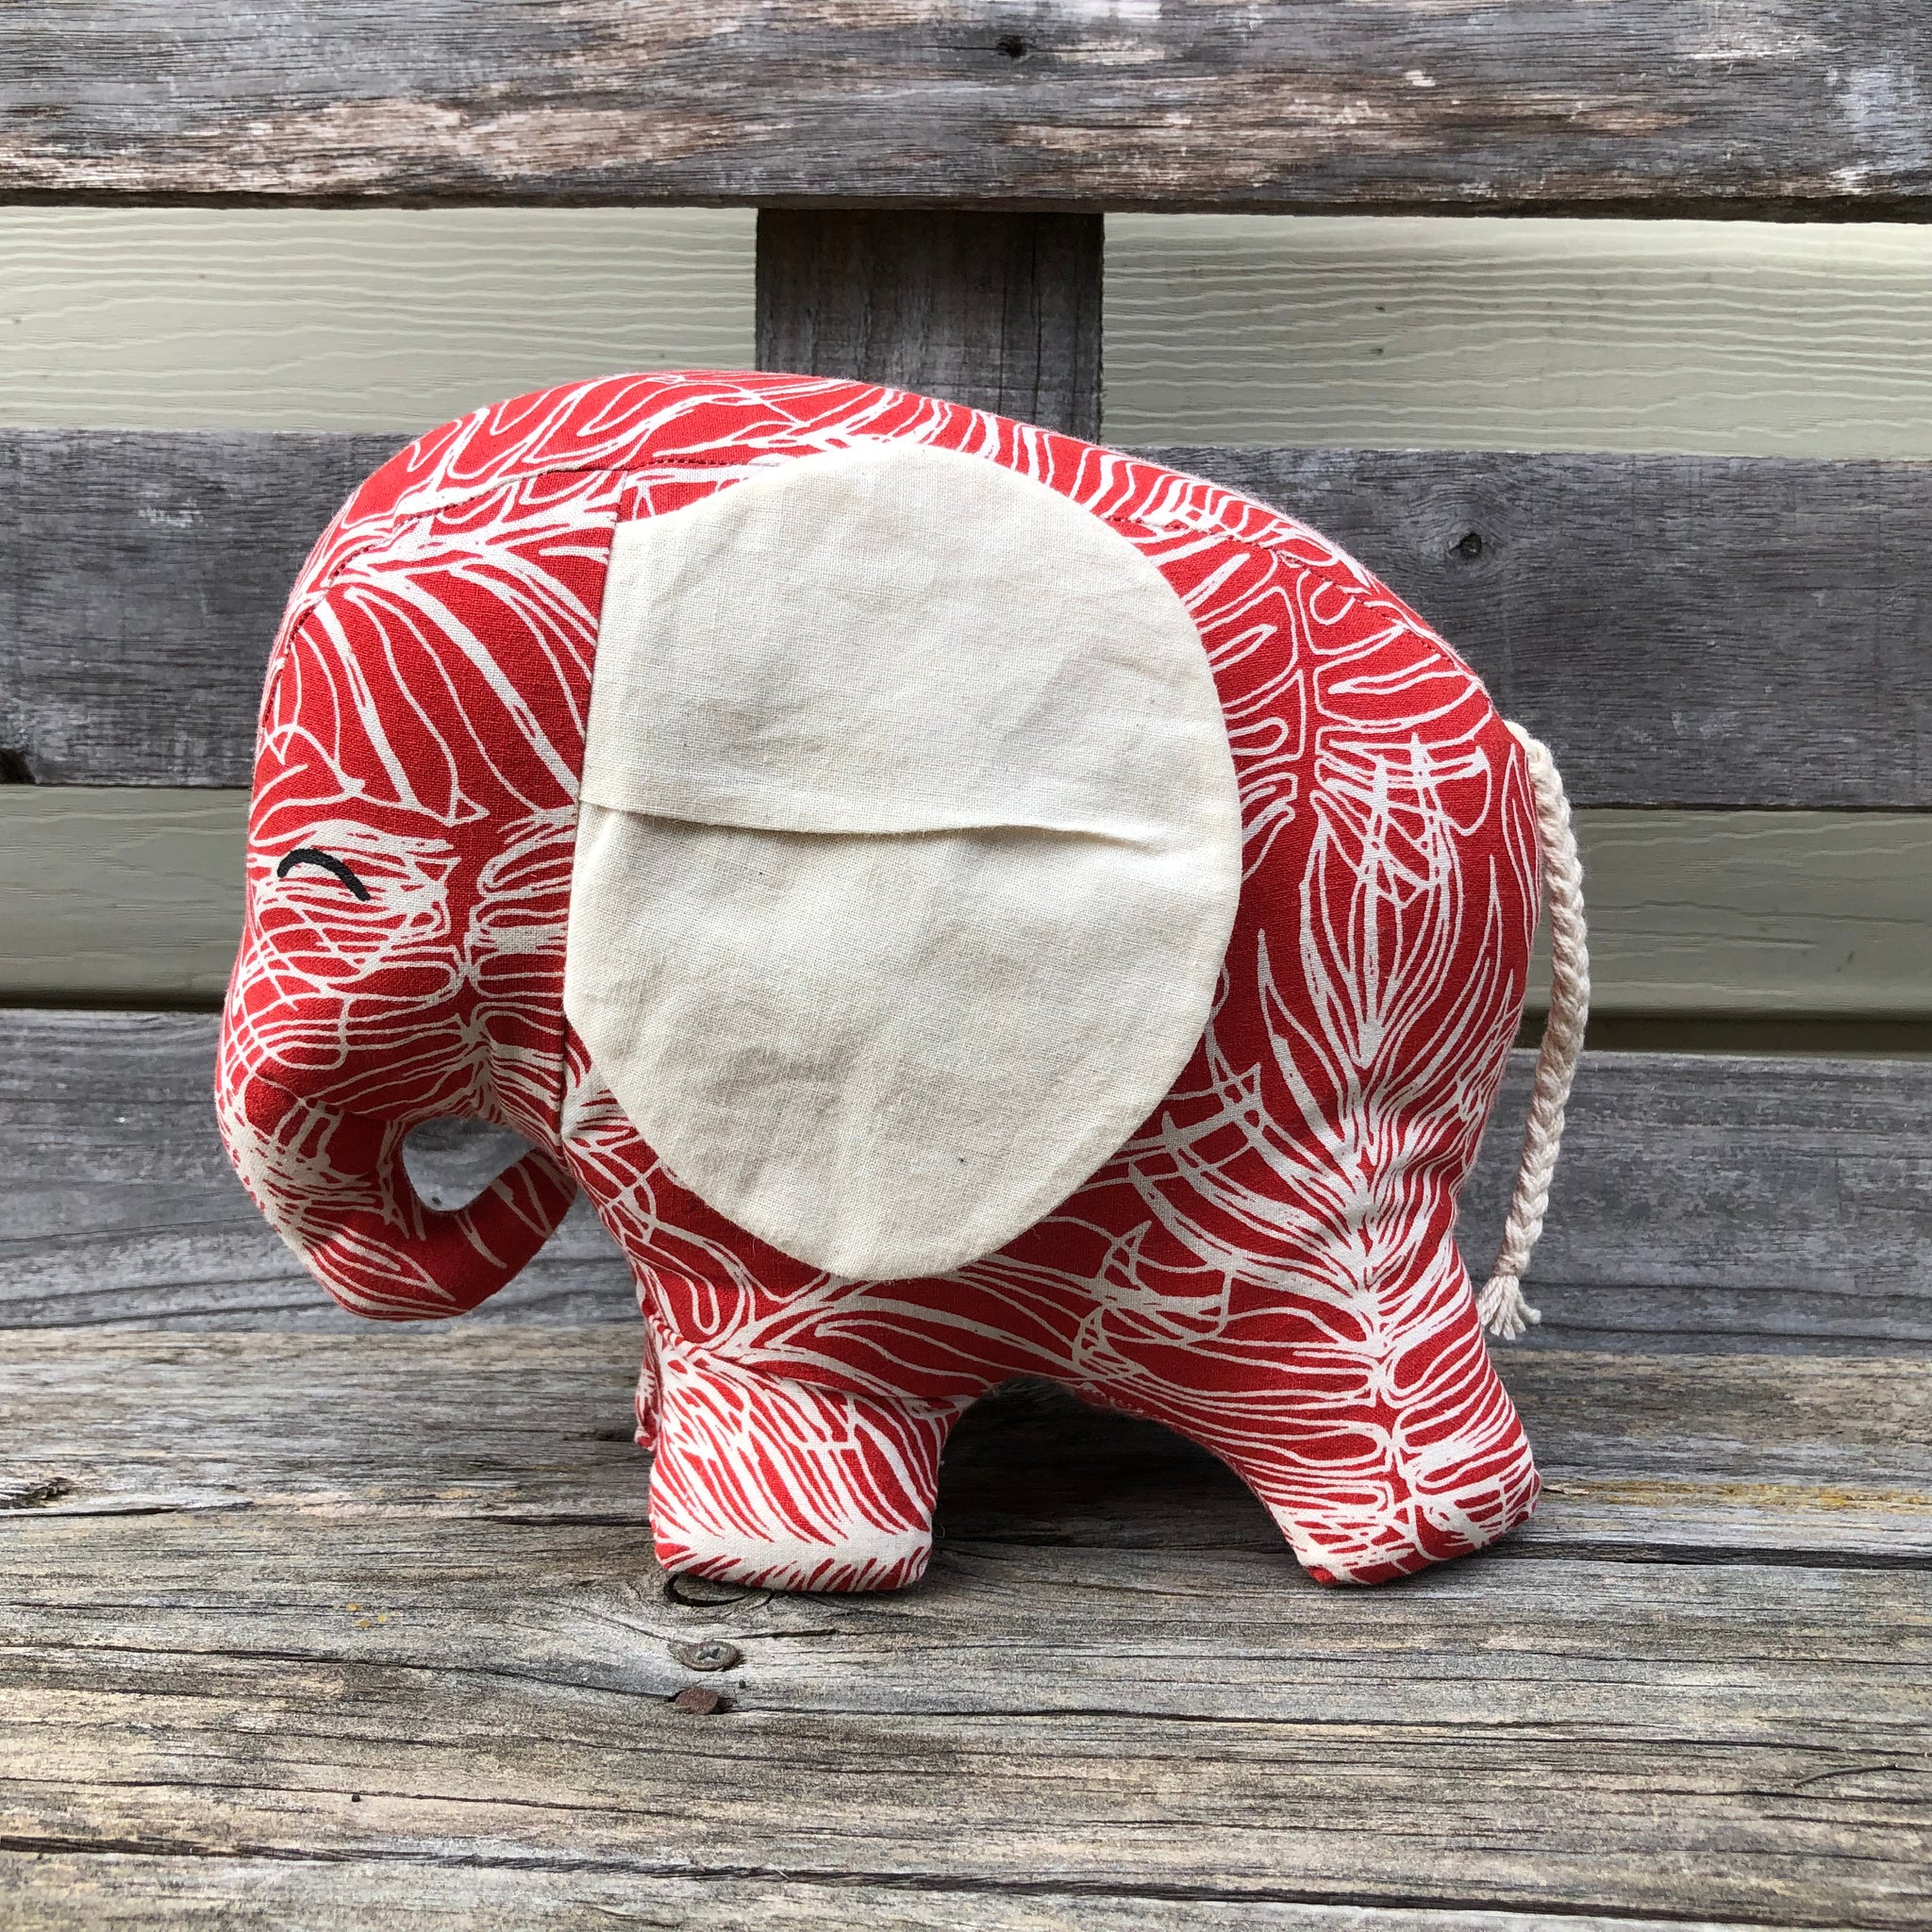 Red elephant with white screeen printed leaf outlines and big white fabric ears sitting on a wooden bench facing to the side